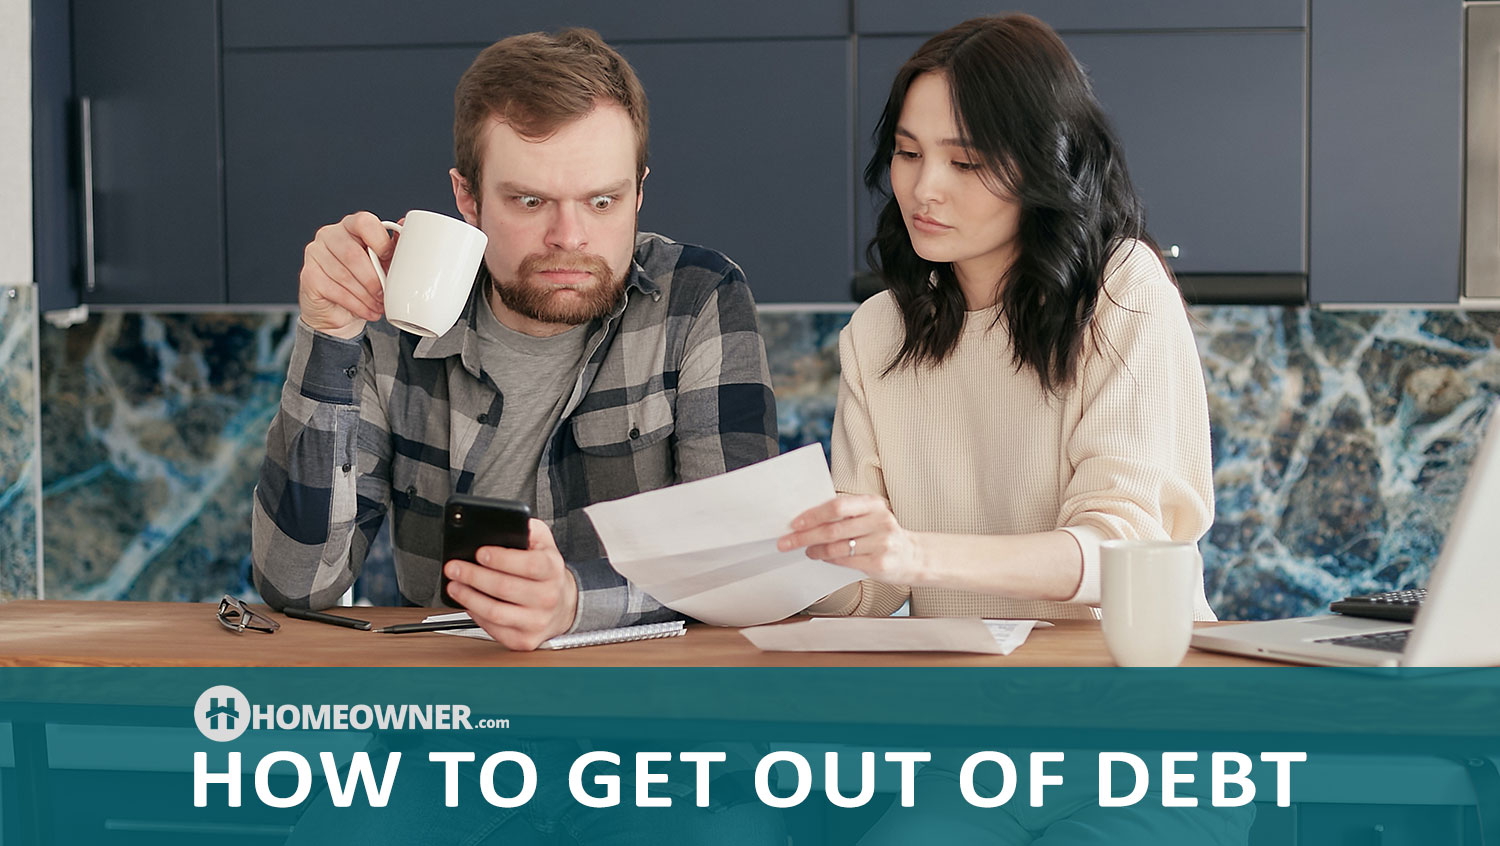 How To Get Out of Debt